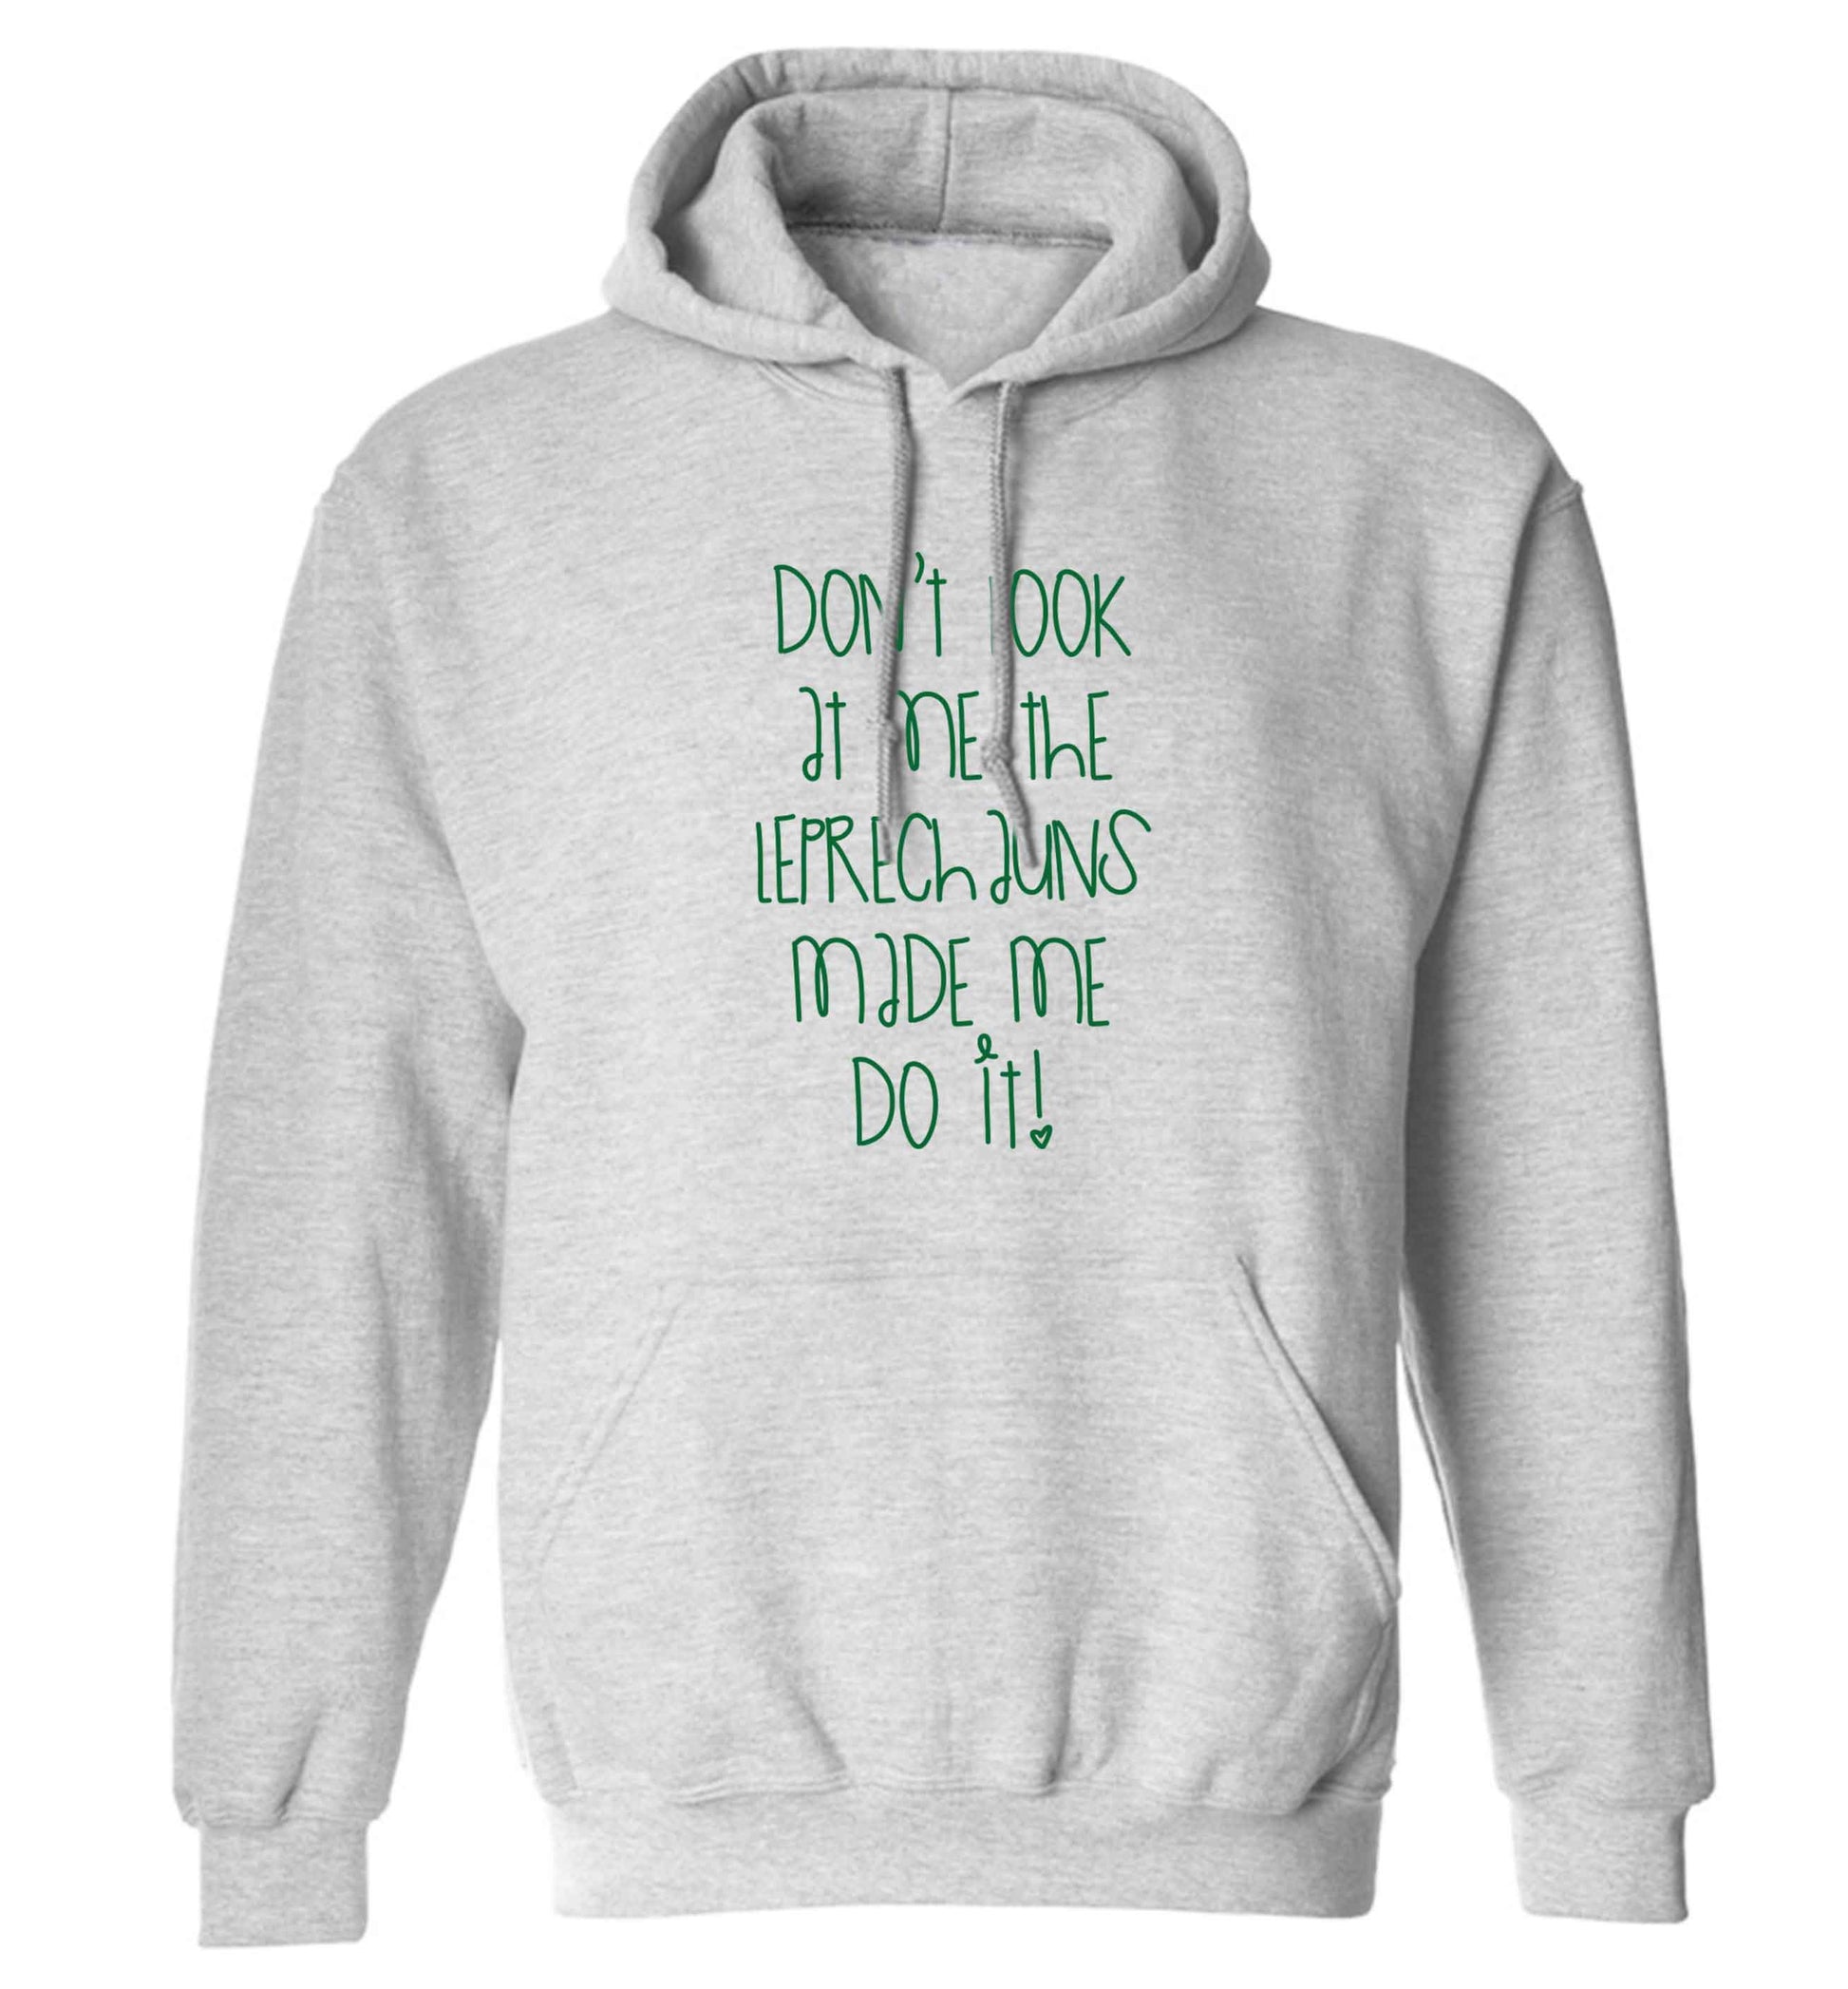 Don't look at me the leprechauns made me do it adults unisex grey hoodie 2XL